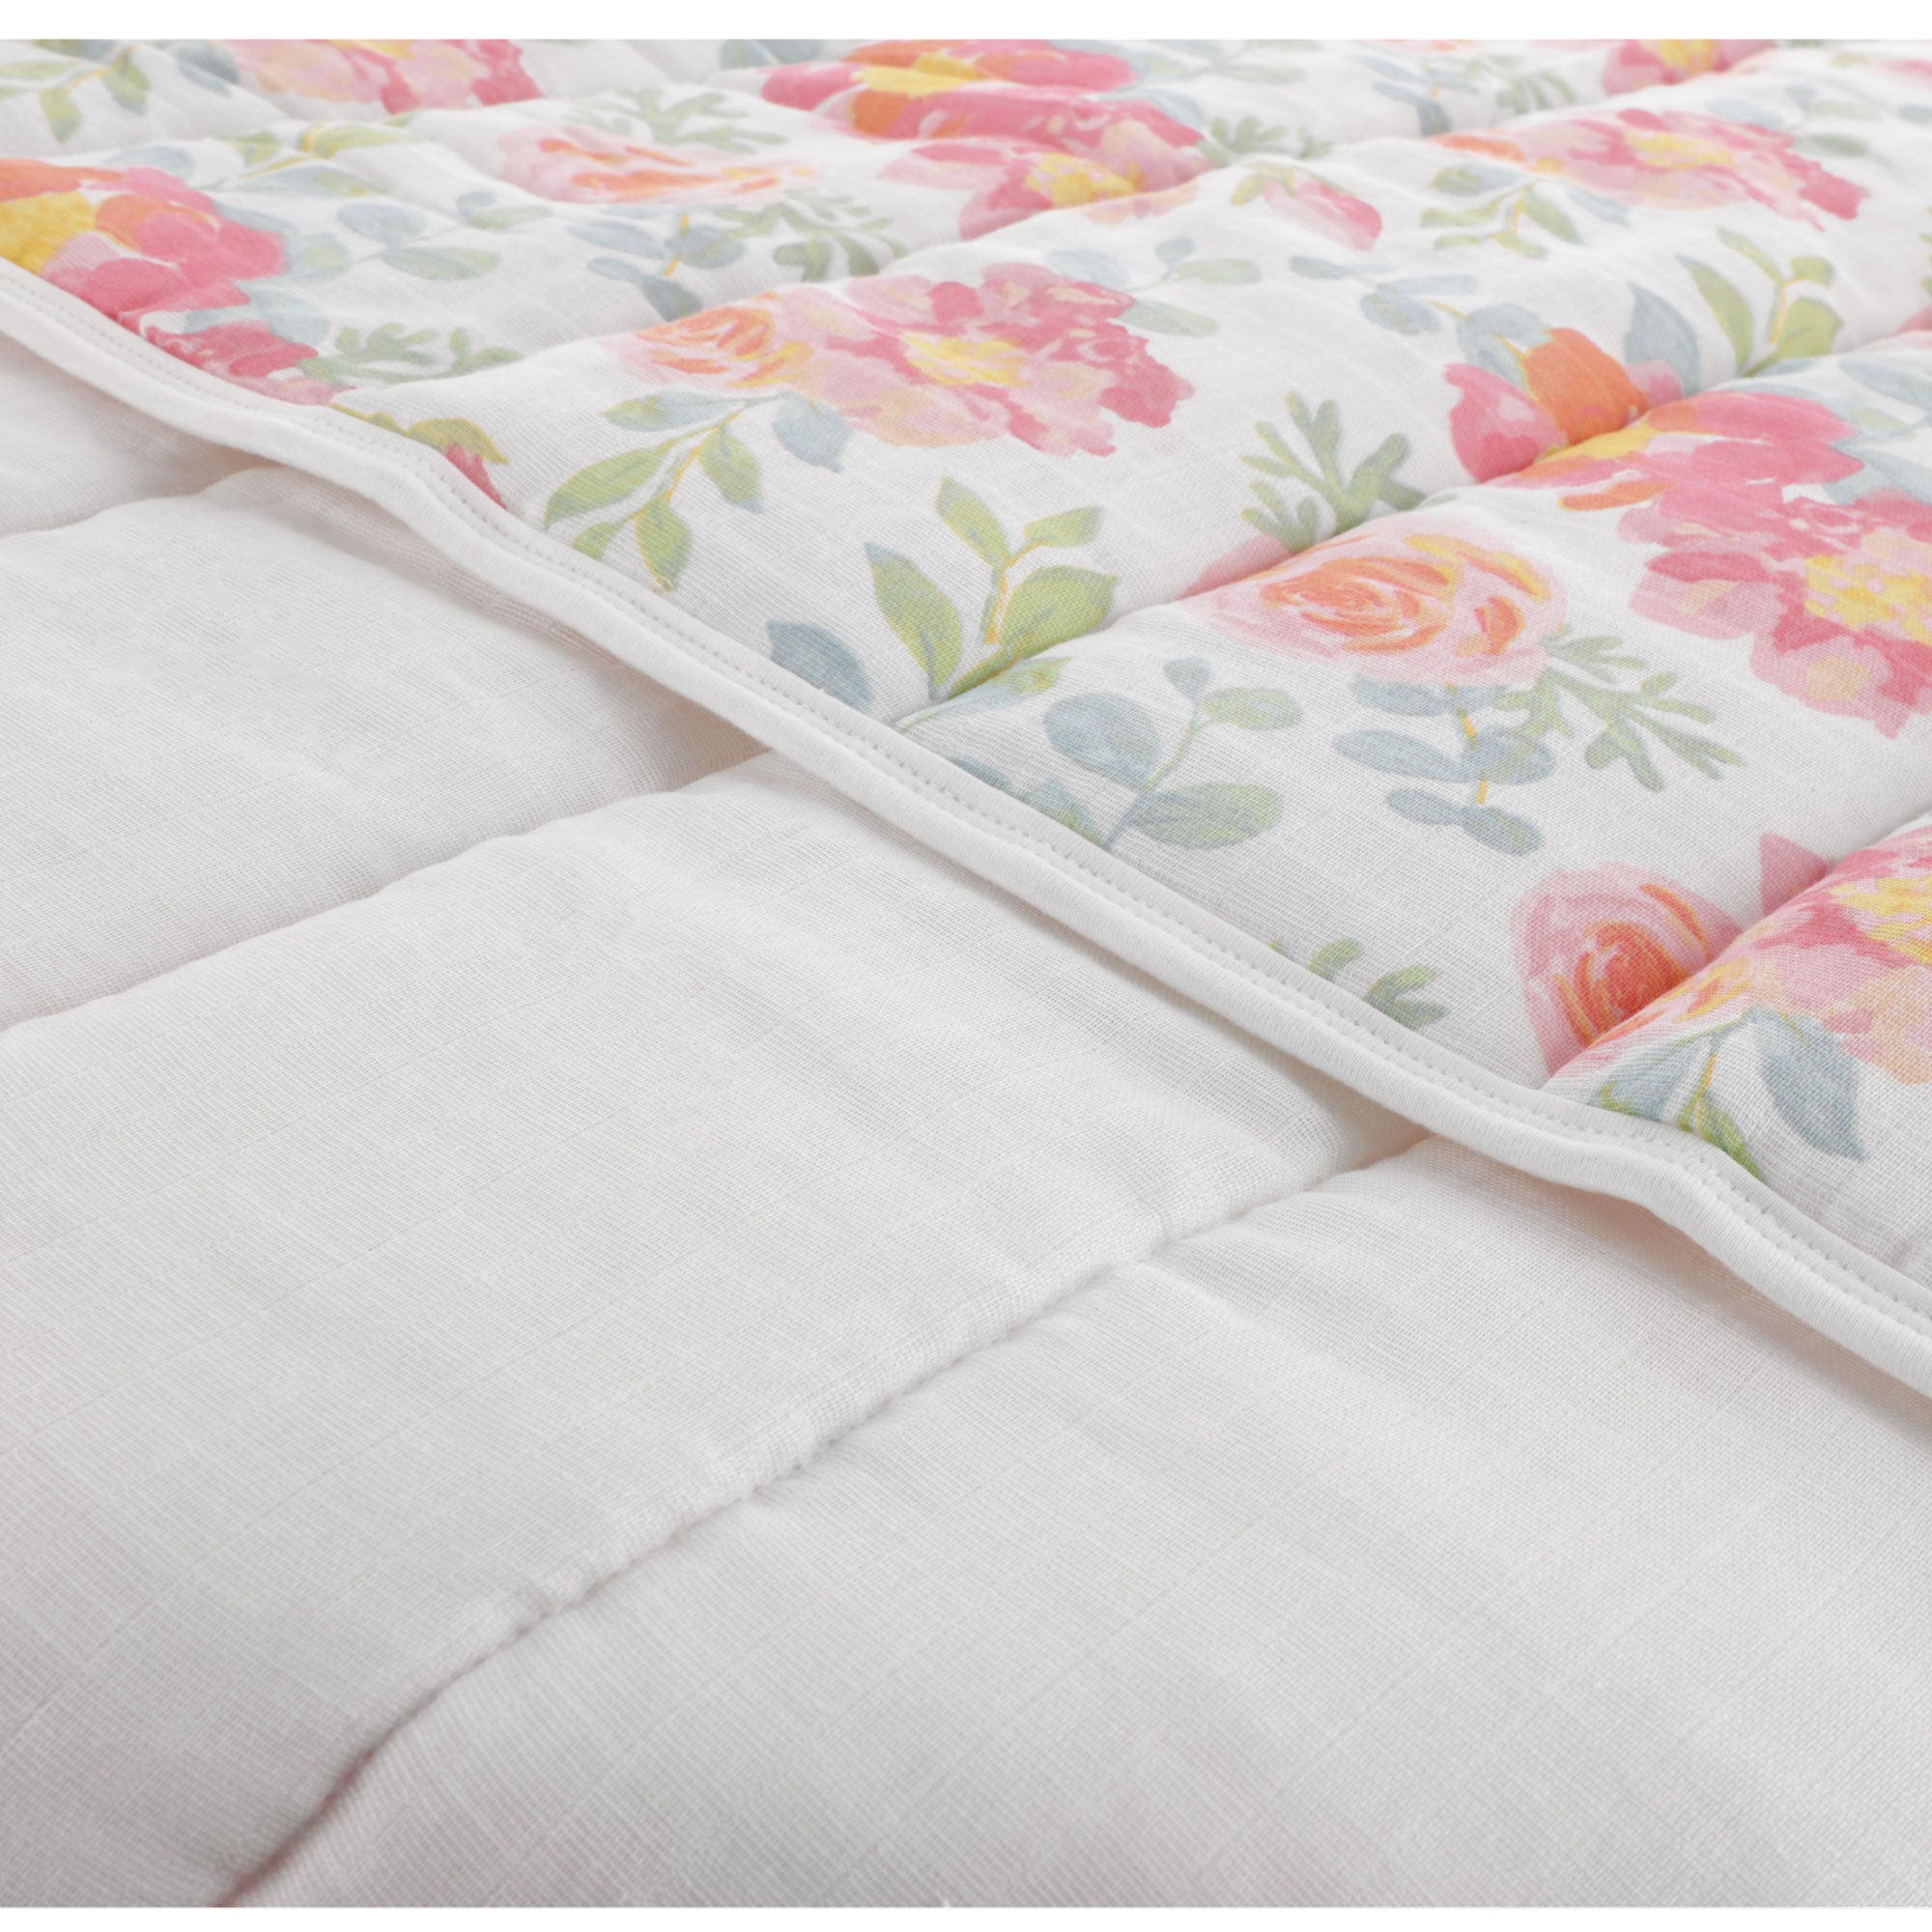 FH-07081 Muslin Reversible Quilted Blanket 30" x 40" - Garden Floral